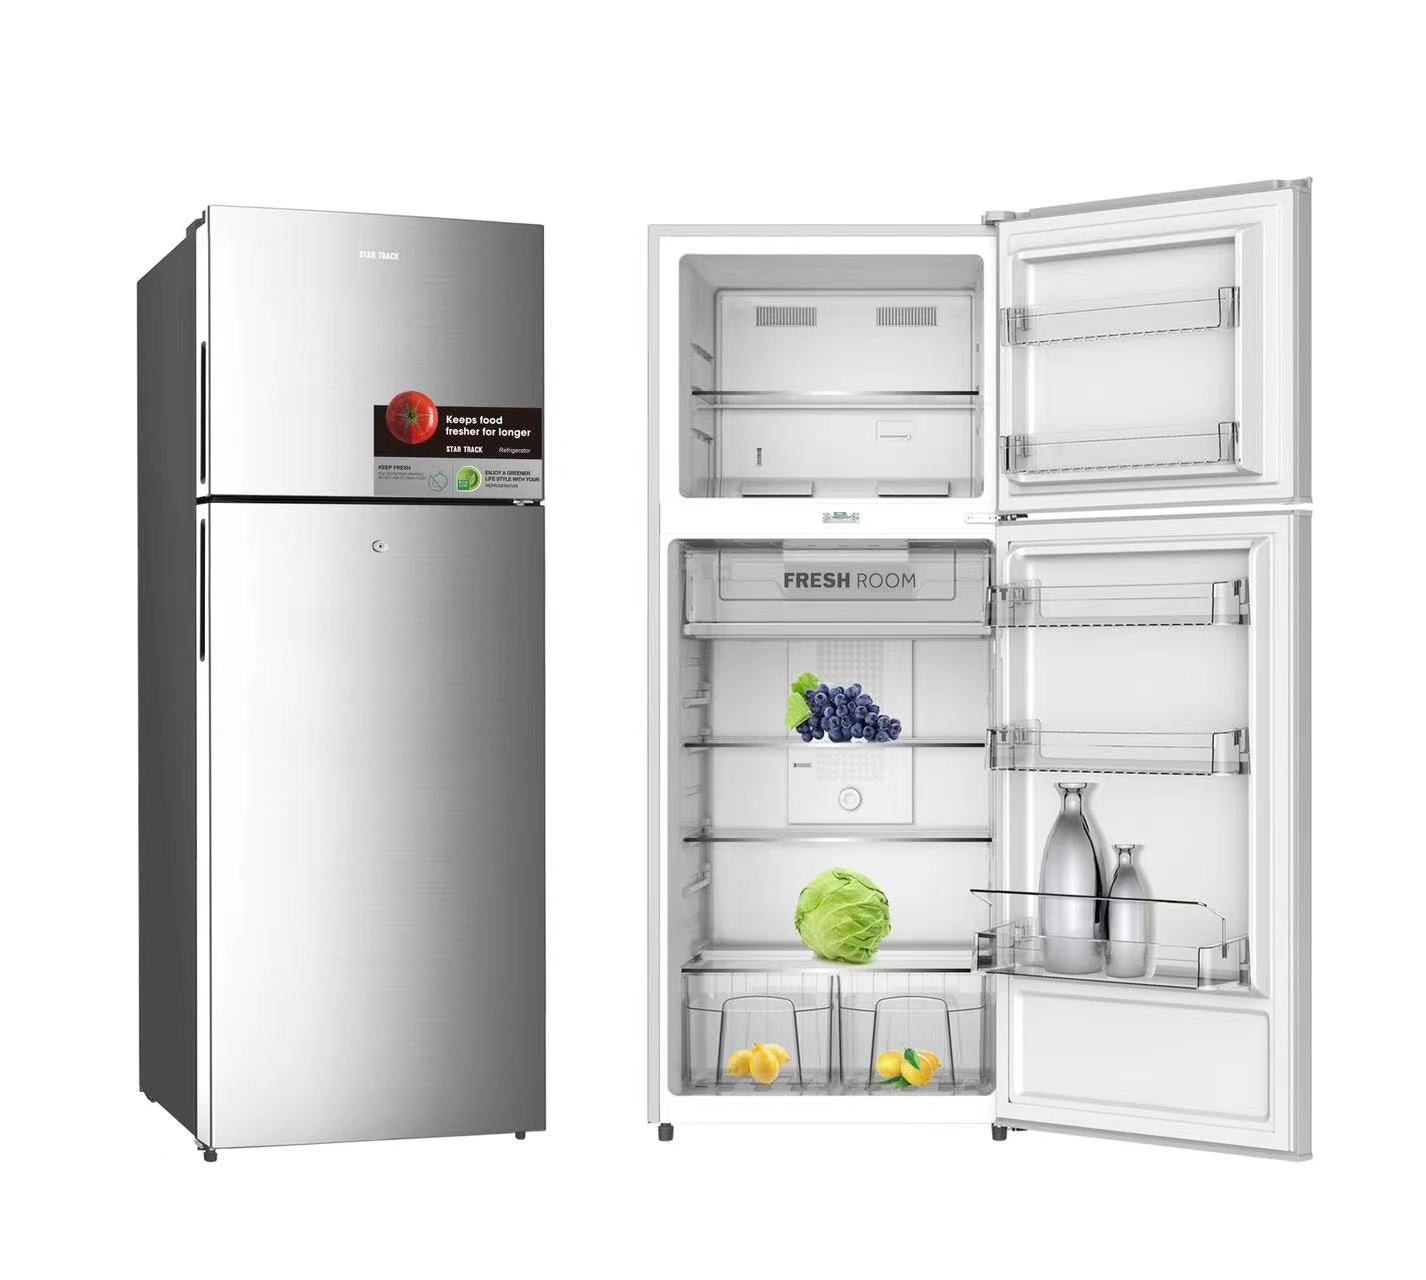 Star Track Top Mount Refrigerator Frost Free Reliable for Life comes with Smart Technology with Multiple Air Flow Quick Cooling with Touch Led Control